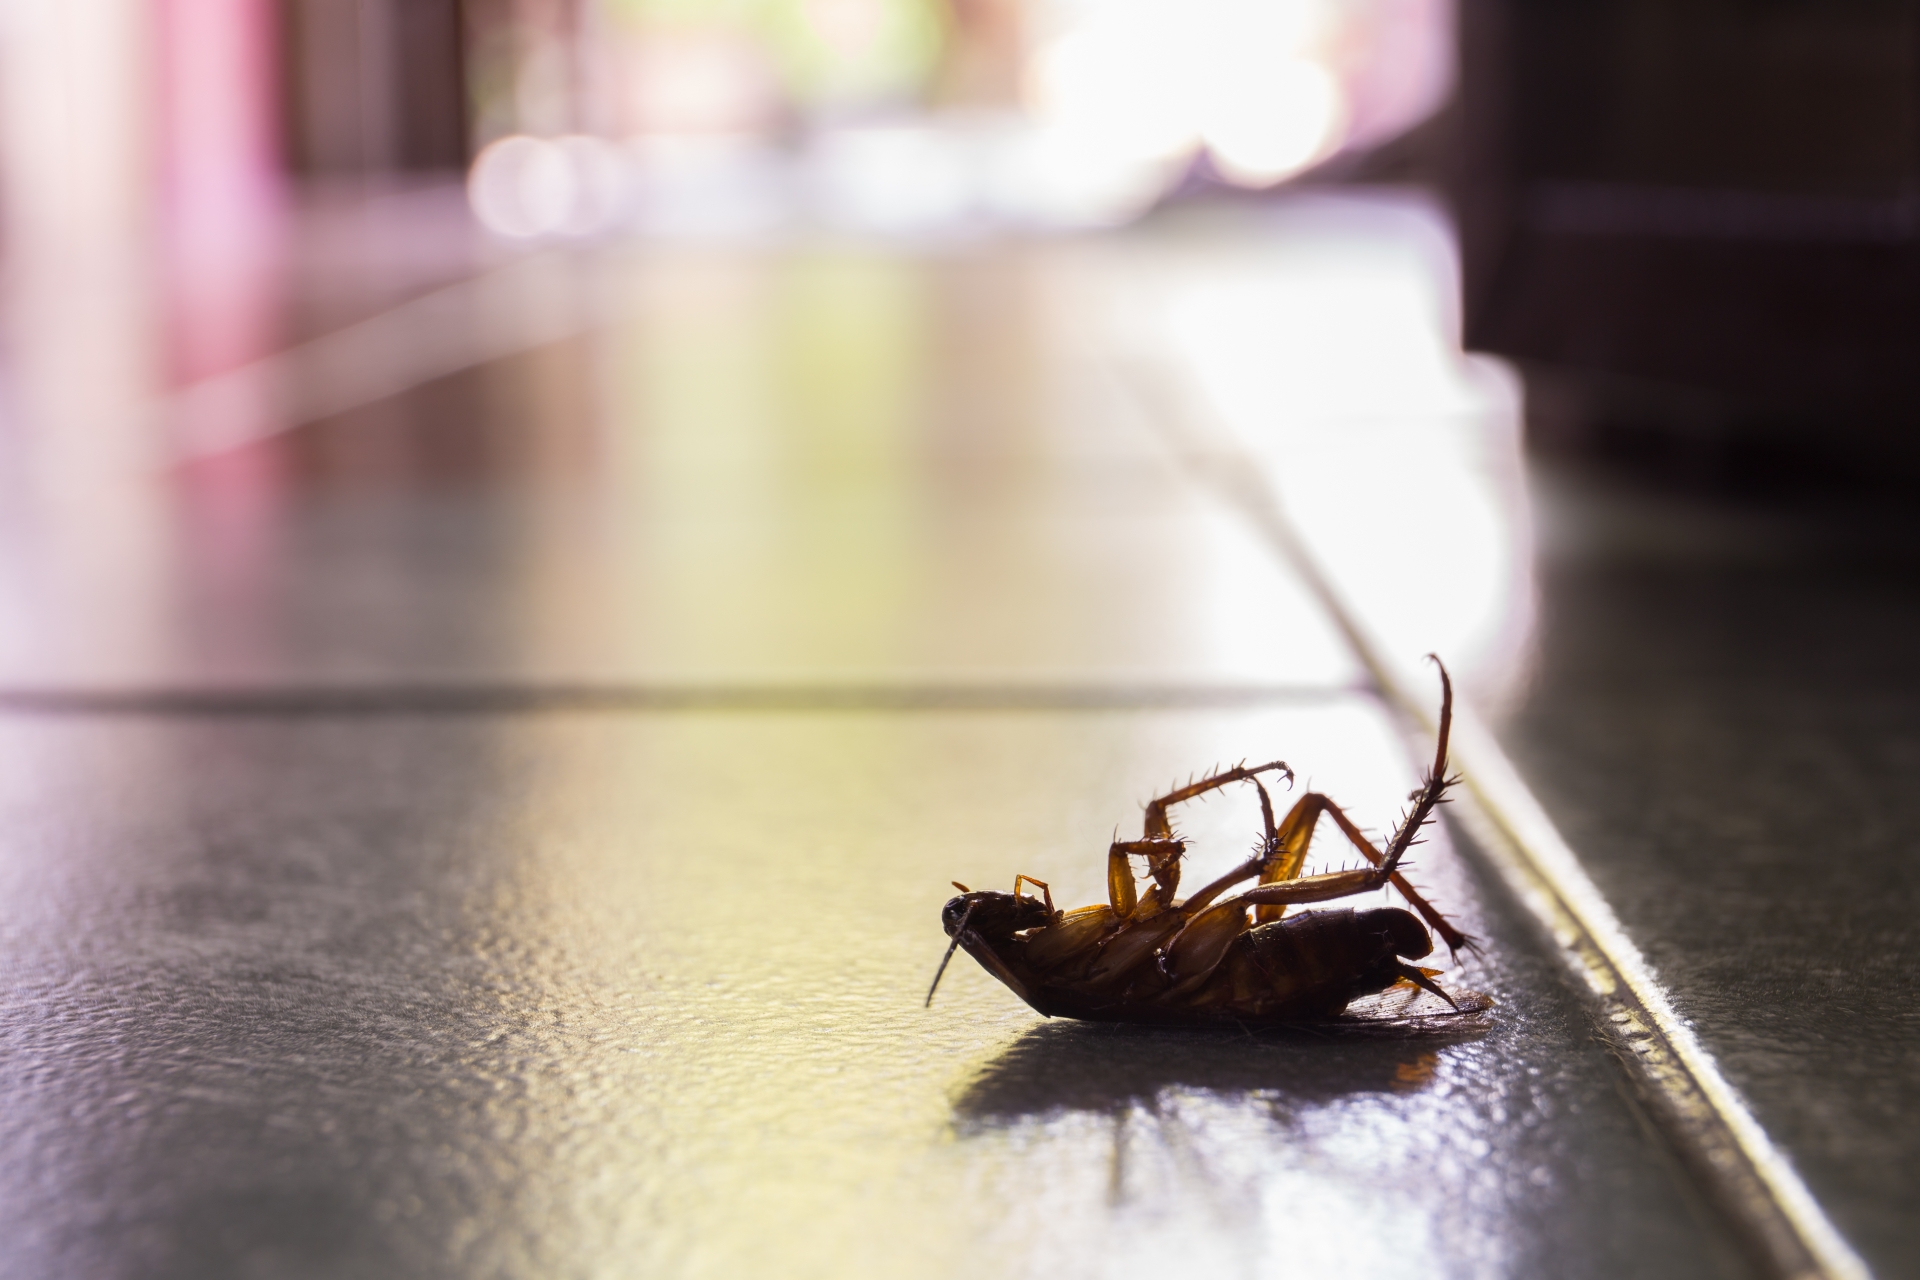 Cockroach Control, Pest Control in Charlton, SE7. Call Now 020 8166 9746